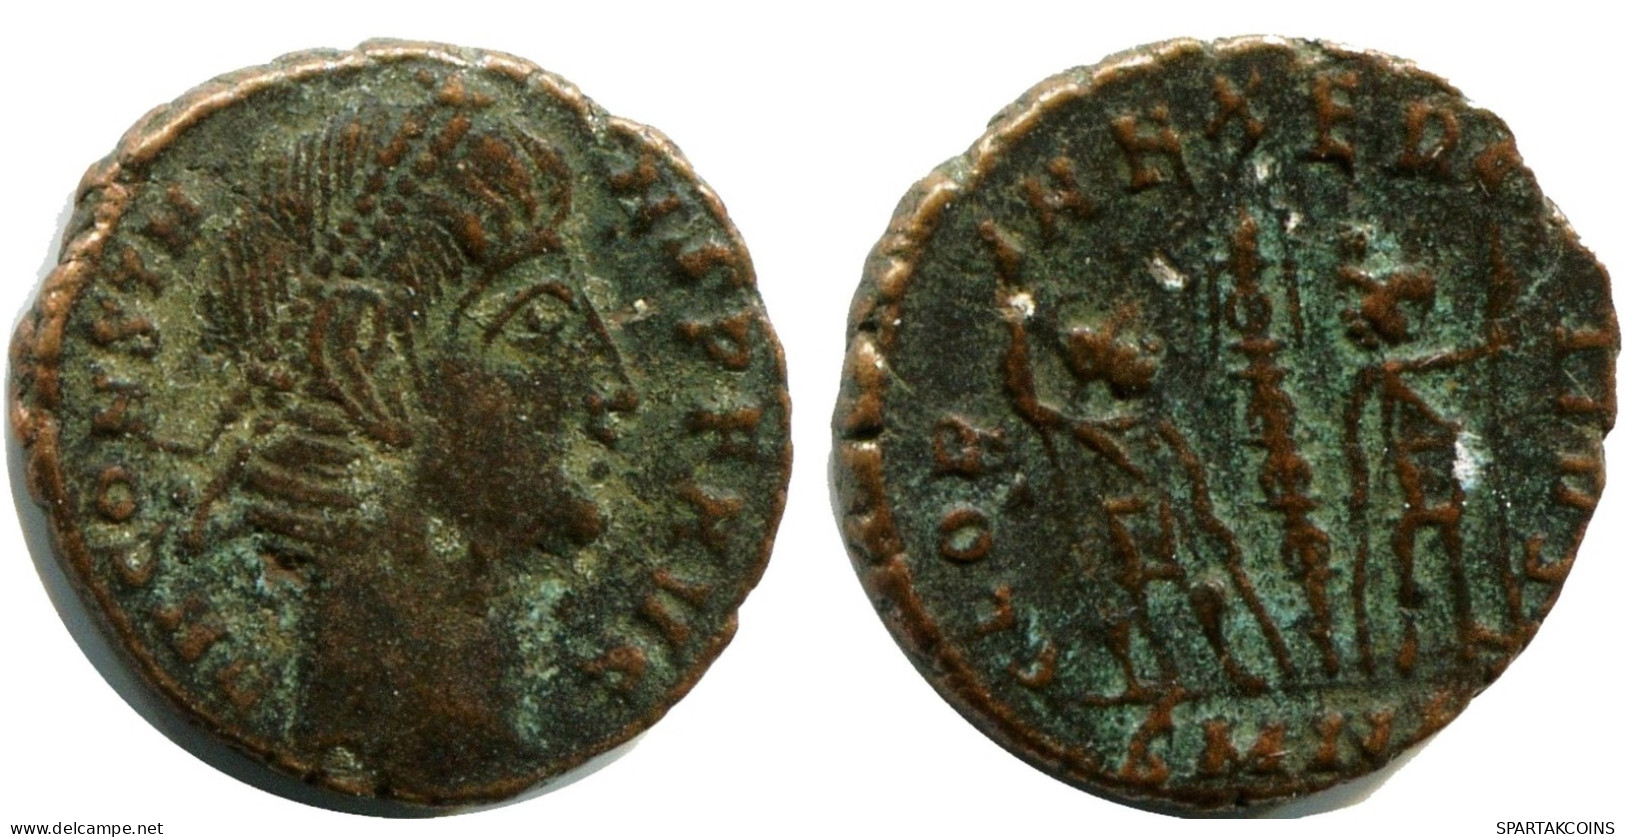 CONSTANS MINTED IN NICOMEDIA FOUND IN IHNASYAH HOARD EGYPT #ANC11774.14.D.A - El Imperio Christiano (307 / 363)